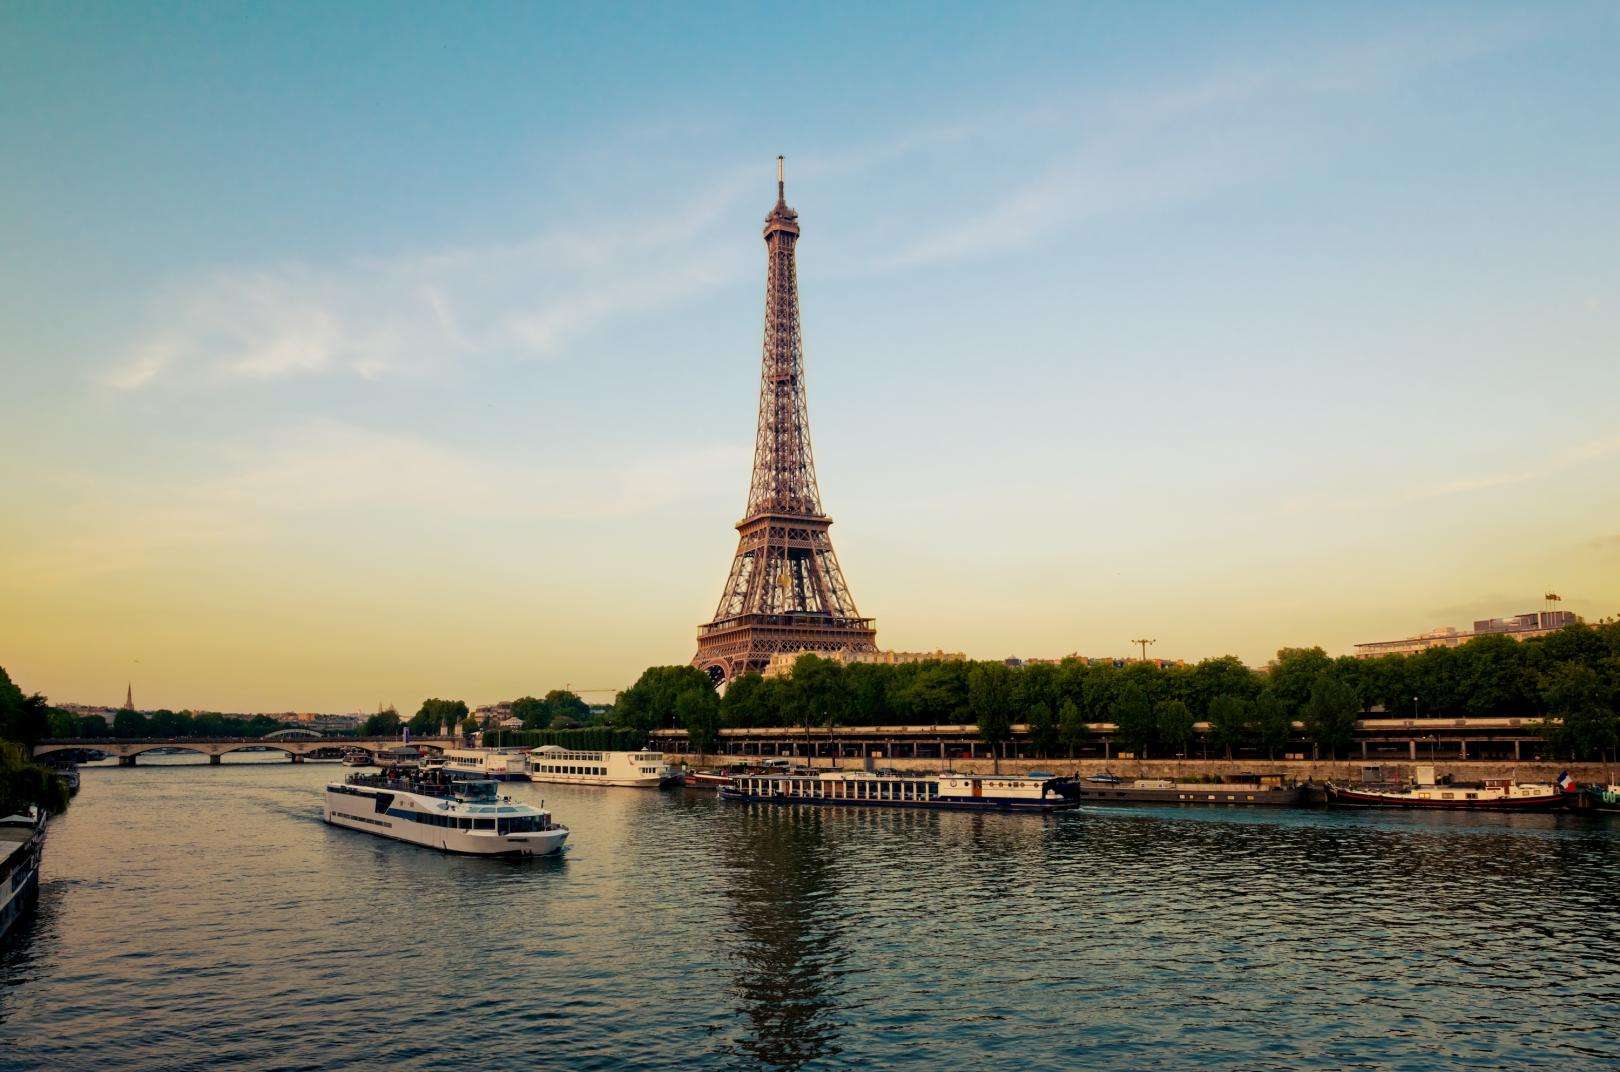 Cruise on the Seine: A Magical Moment aboard the Capitaine Fracasse